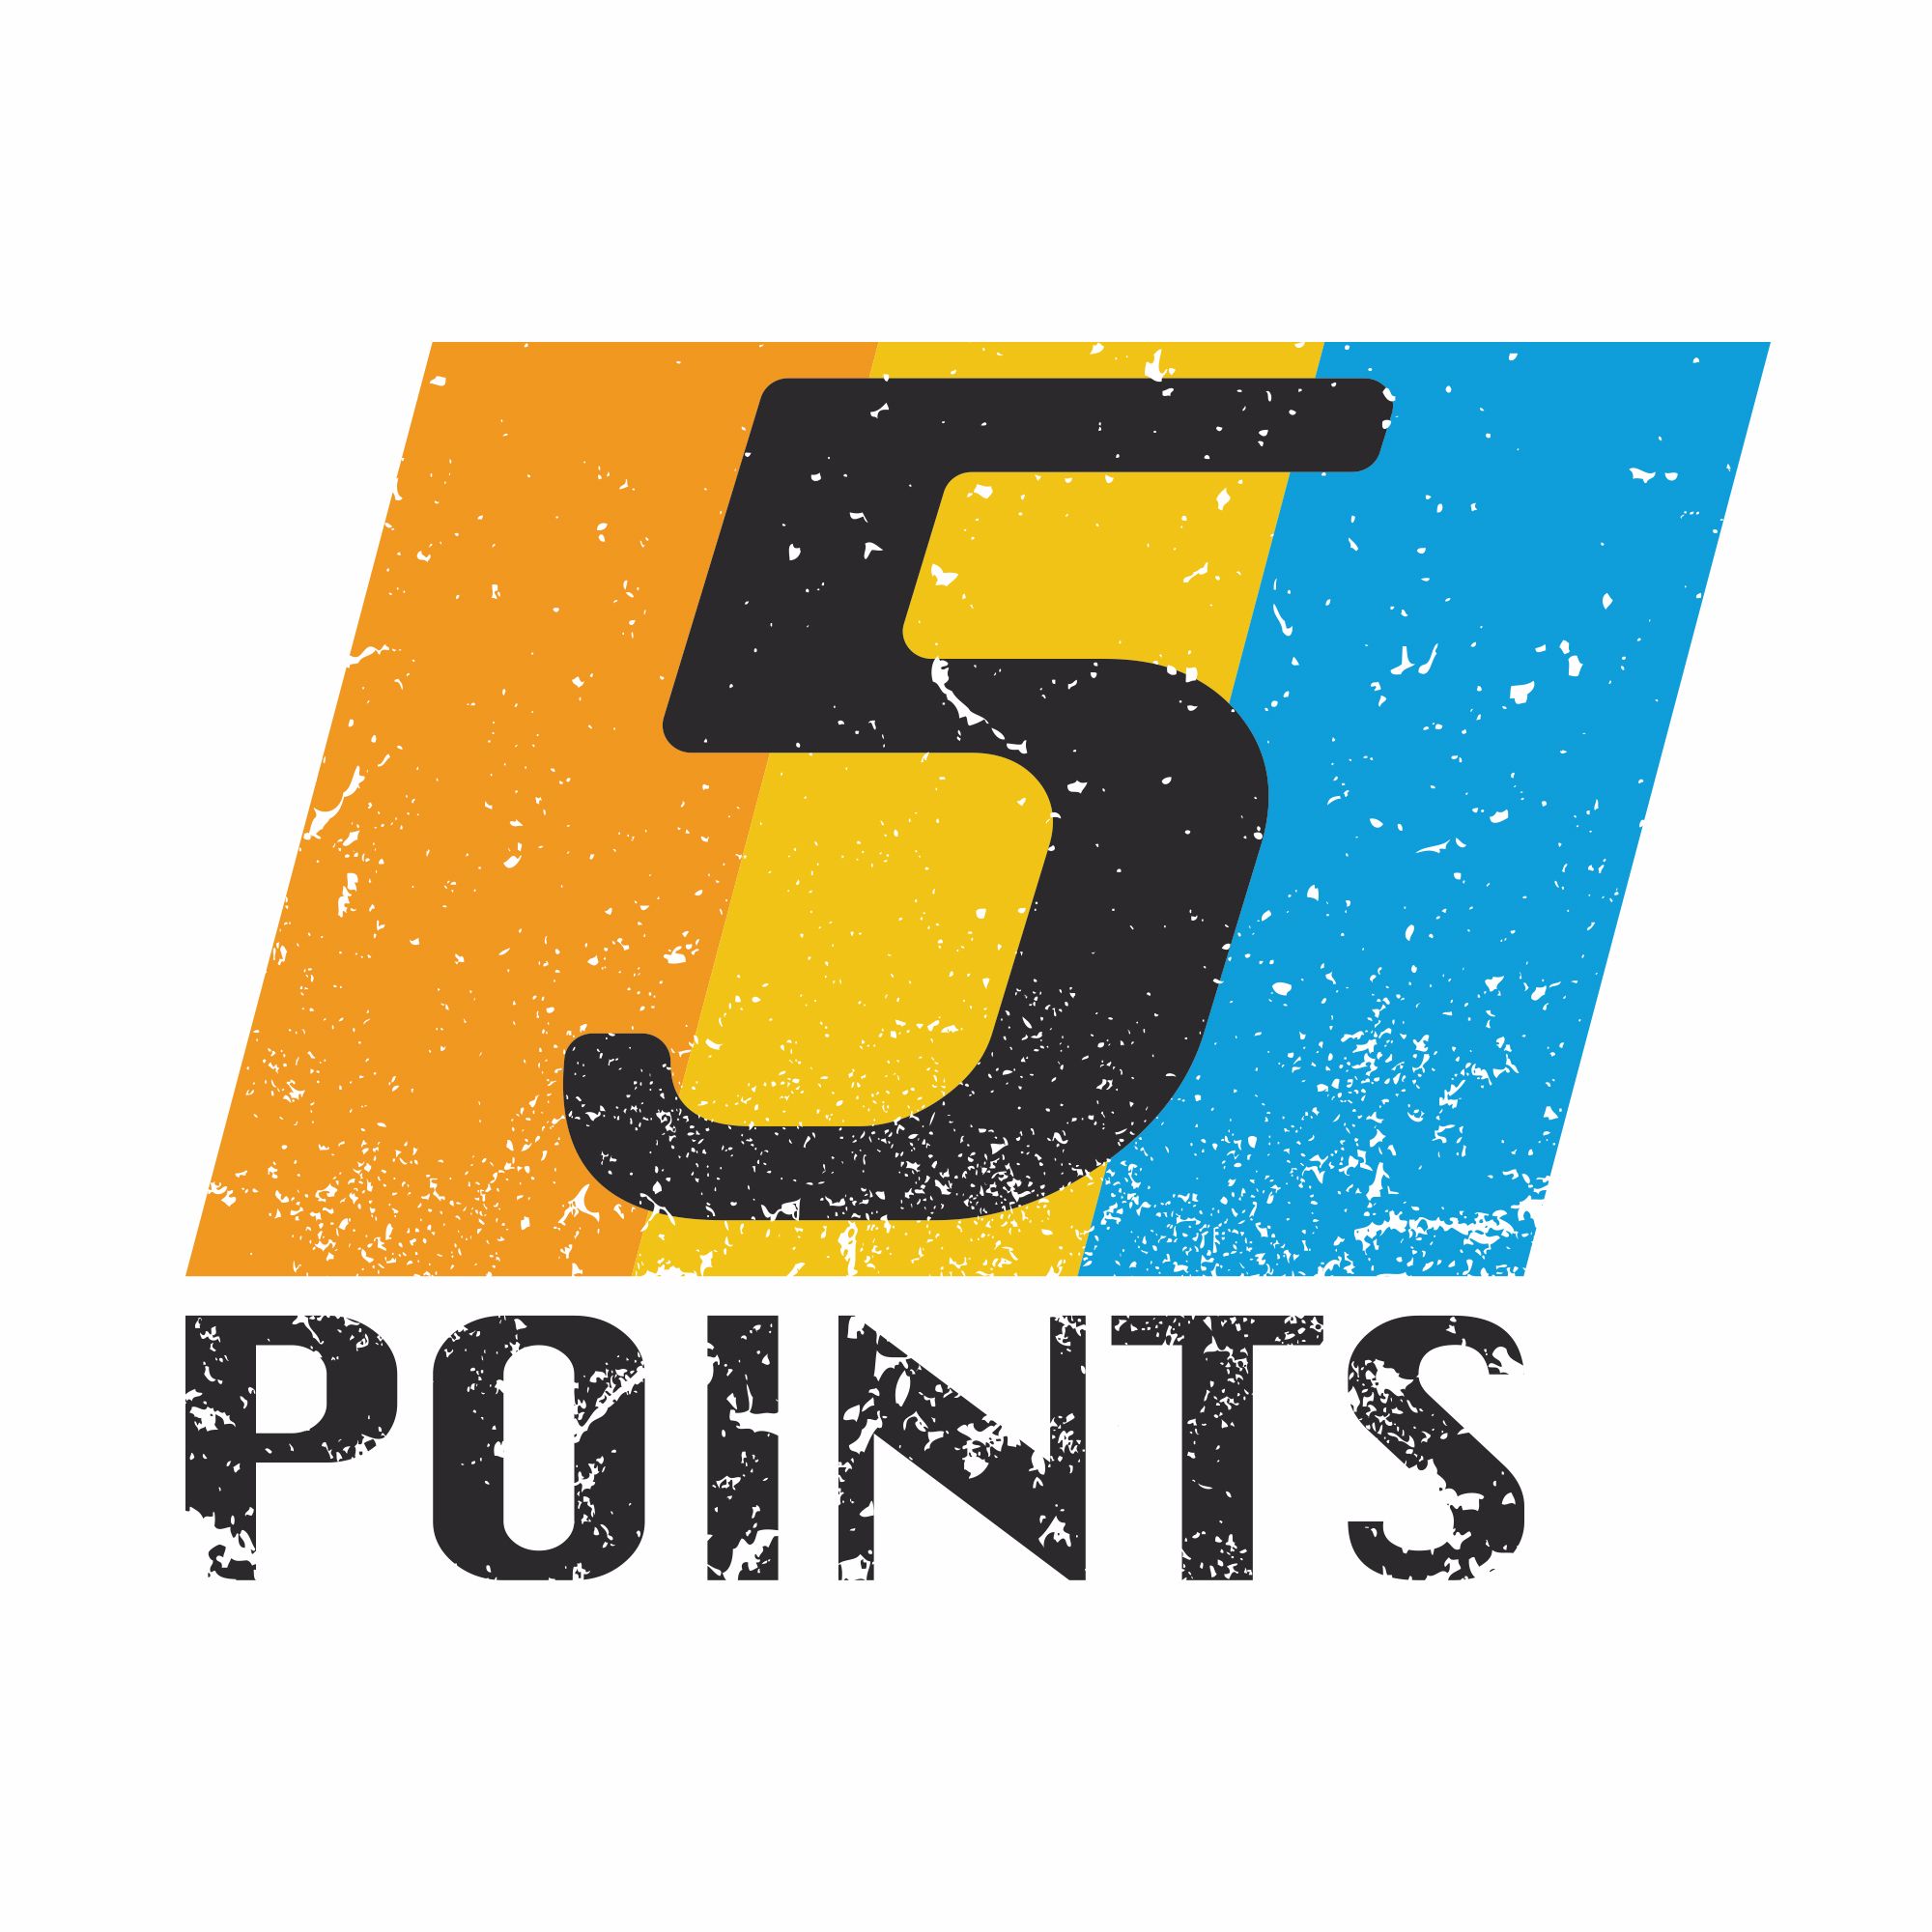 5 Points